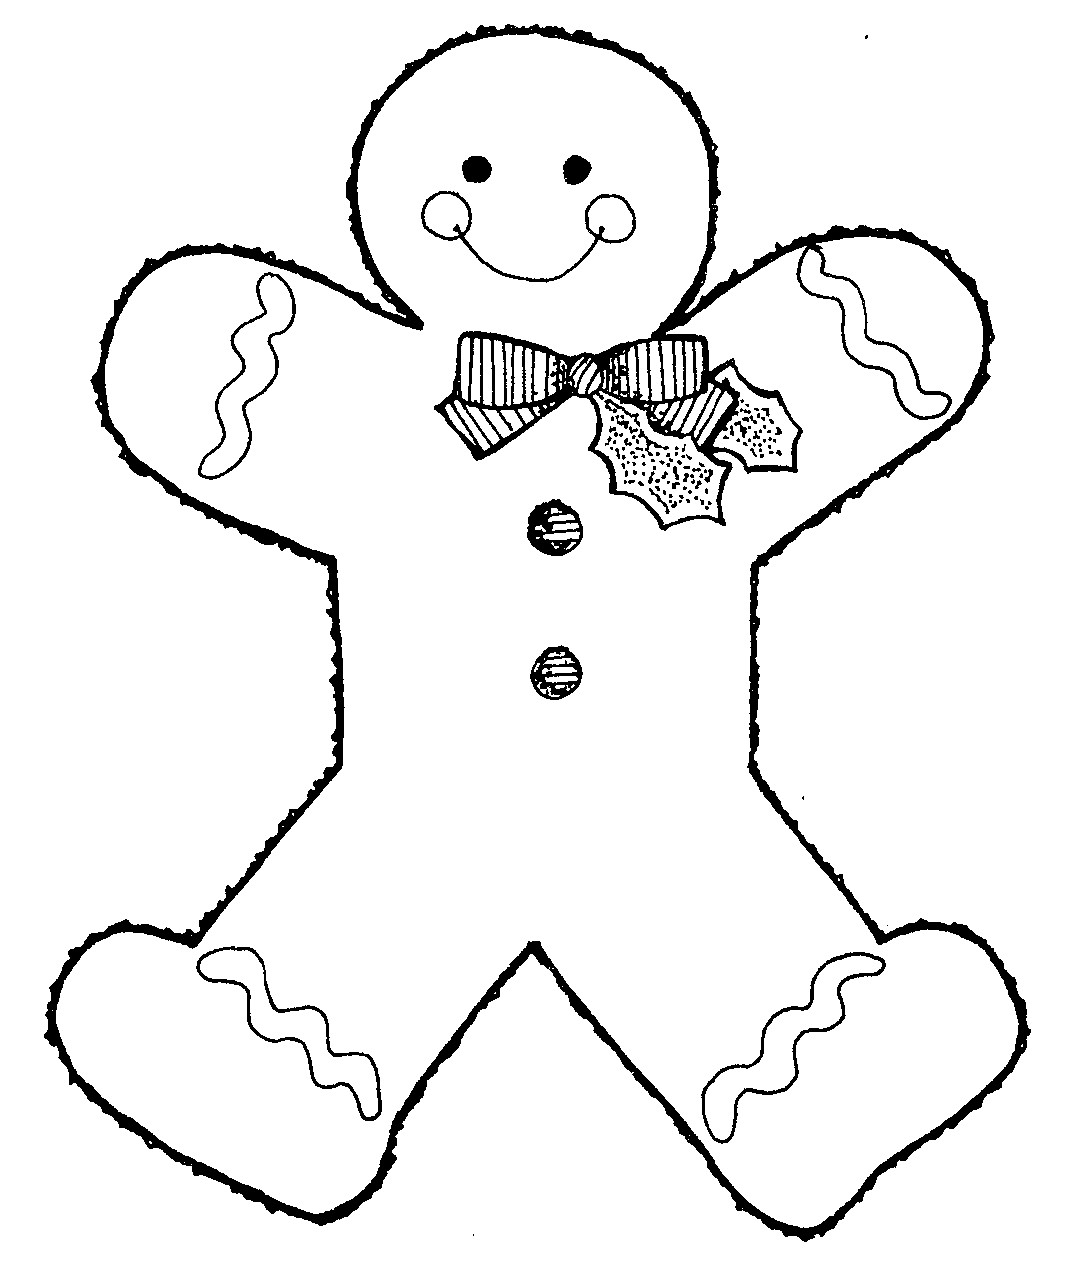 Gingerbread Coloring Pages
 Free Printable Gingerbread Man Coloring Pages For Kids